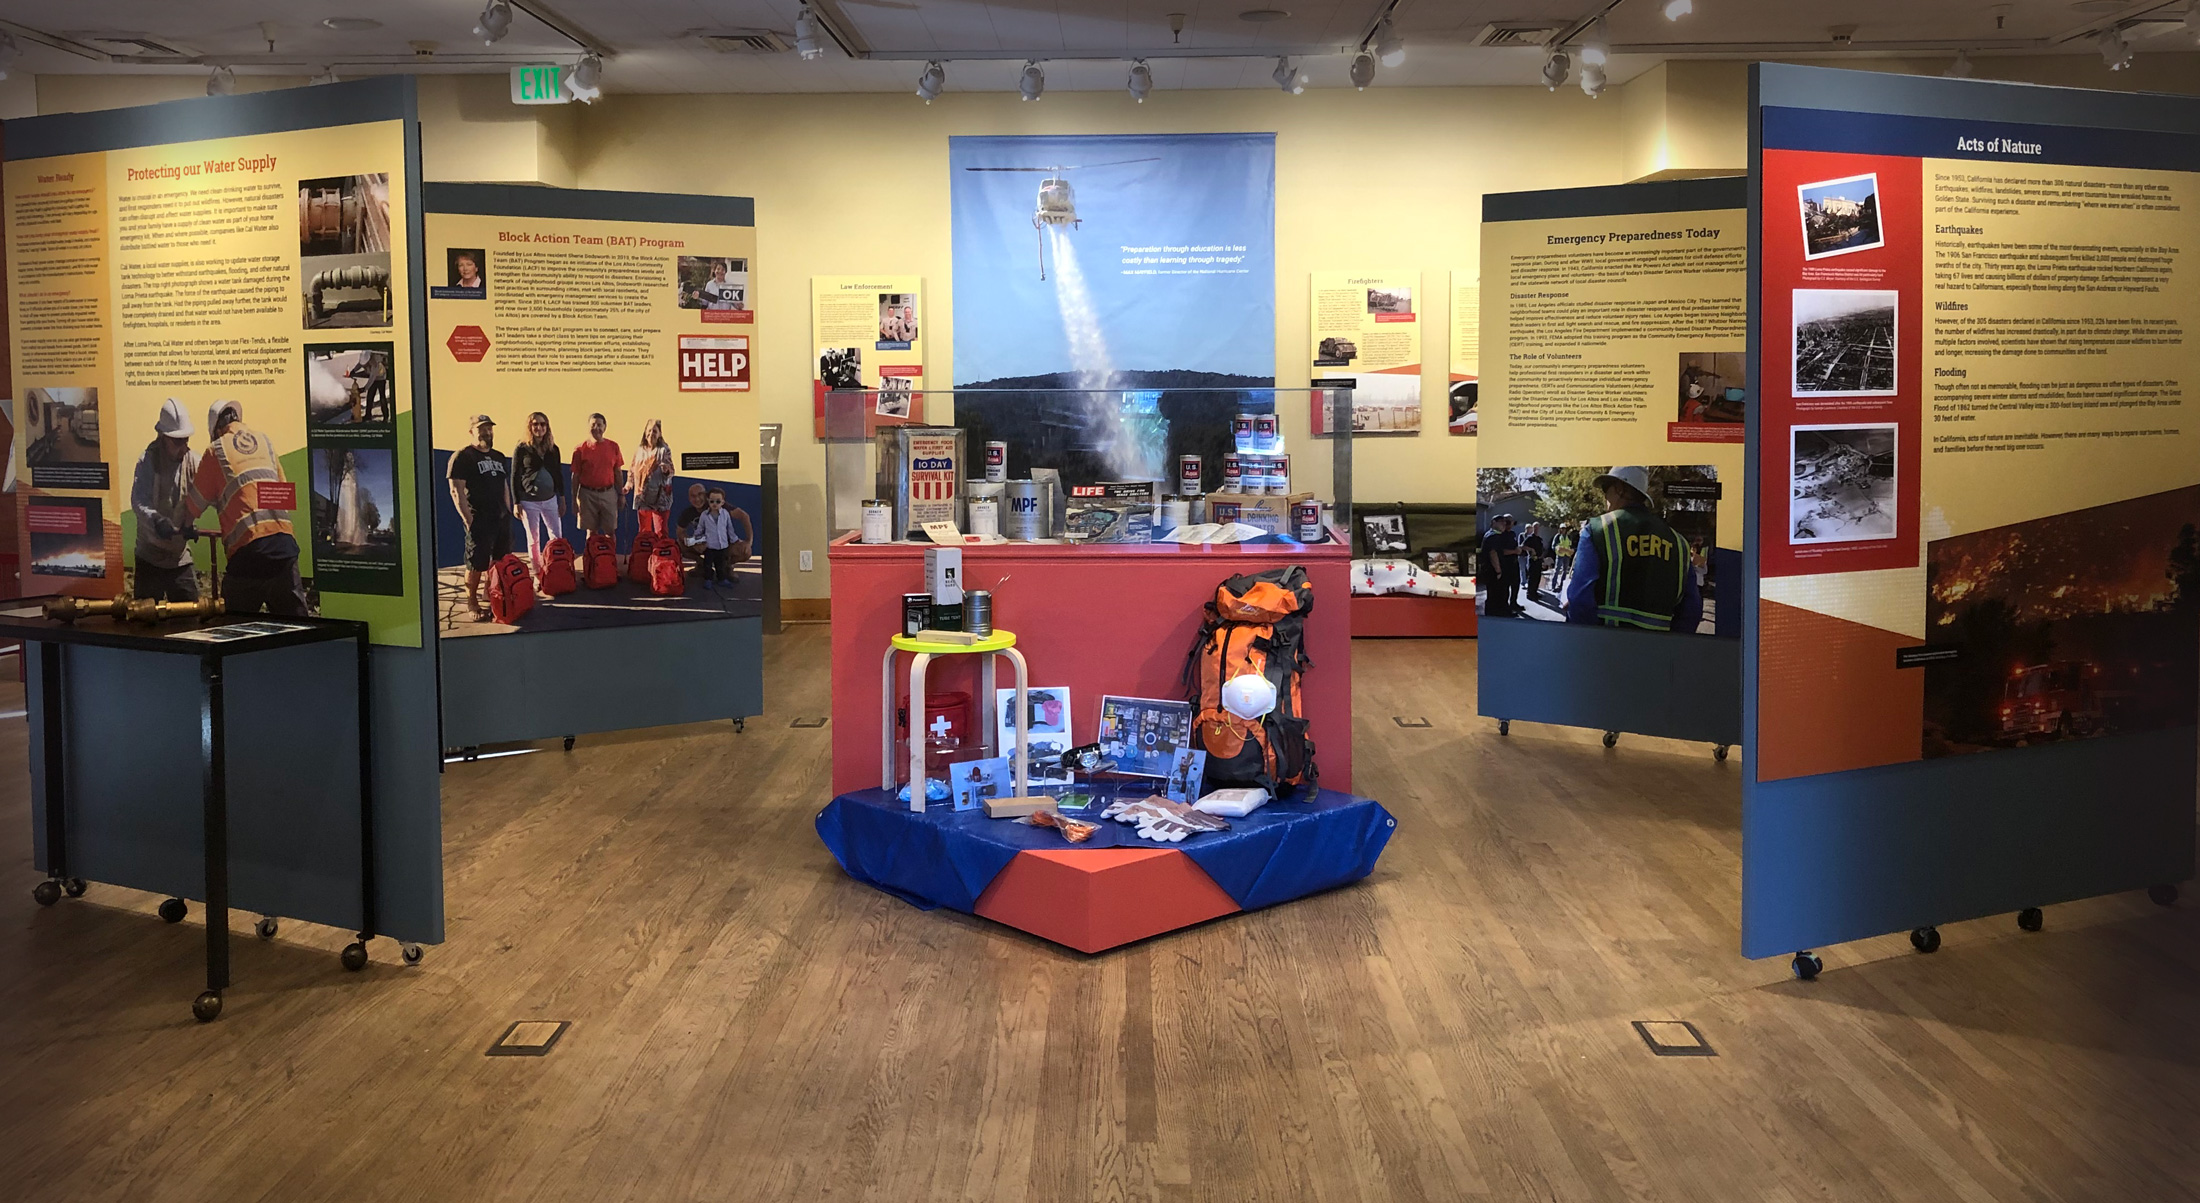 This exhibit aims to bring that sobering sense of possibility home with displays that highlight the history of emergency preparedness and disasters in Los Altos.